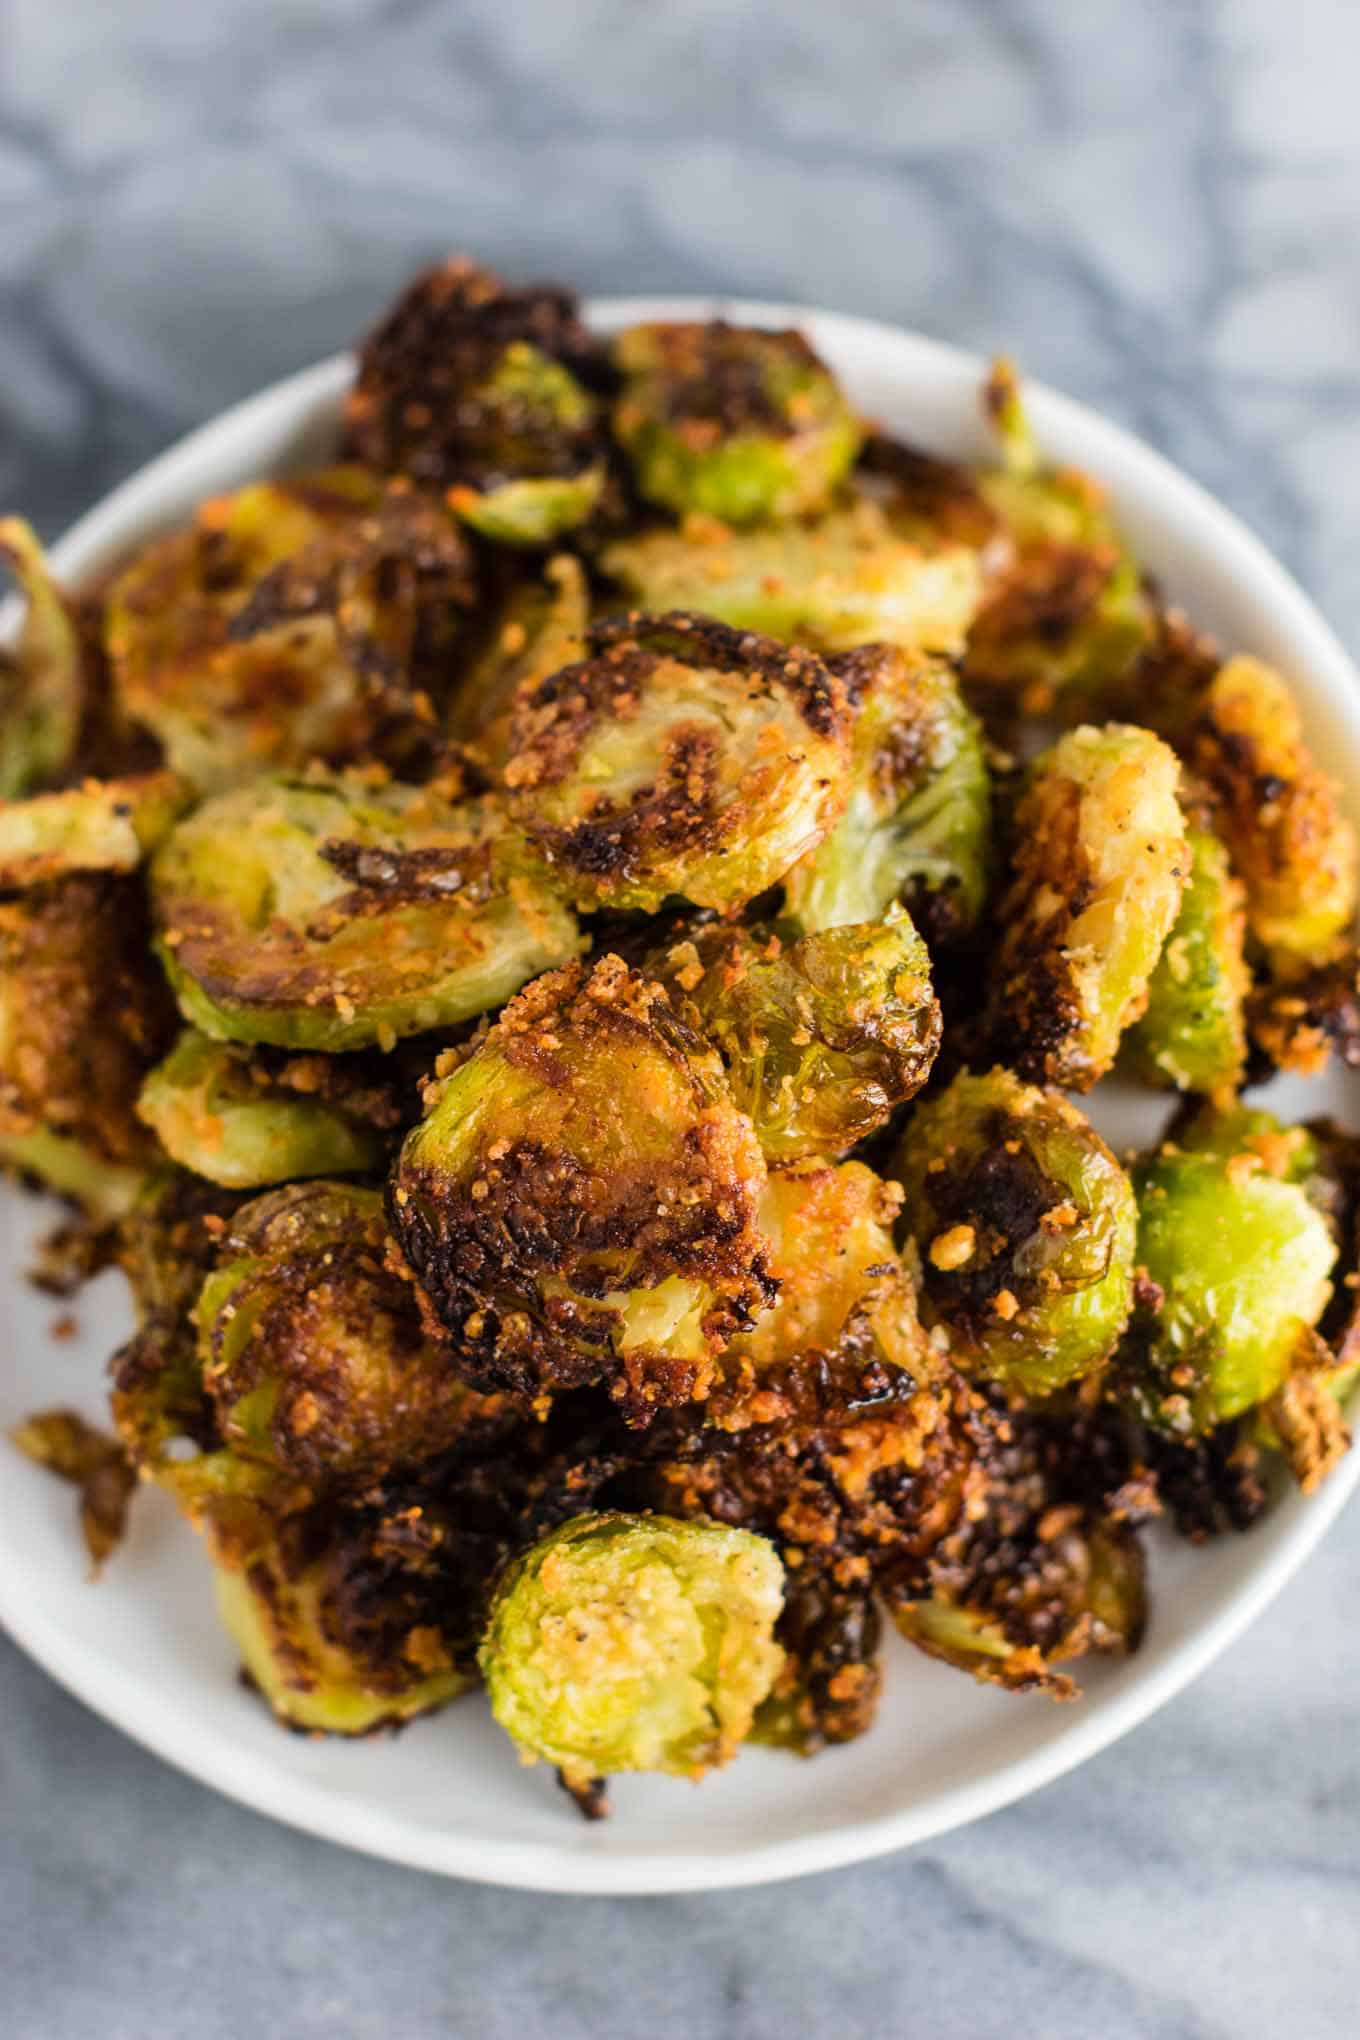 brussel sprouts chips Roasted Brussel sprout chips - these are so good I could eat the whole pan myself! #brusselsprouts #brusselsproutchips #dinner #sidedish #vegetarian